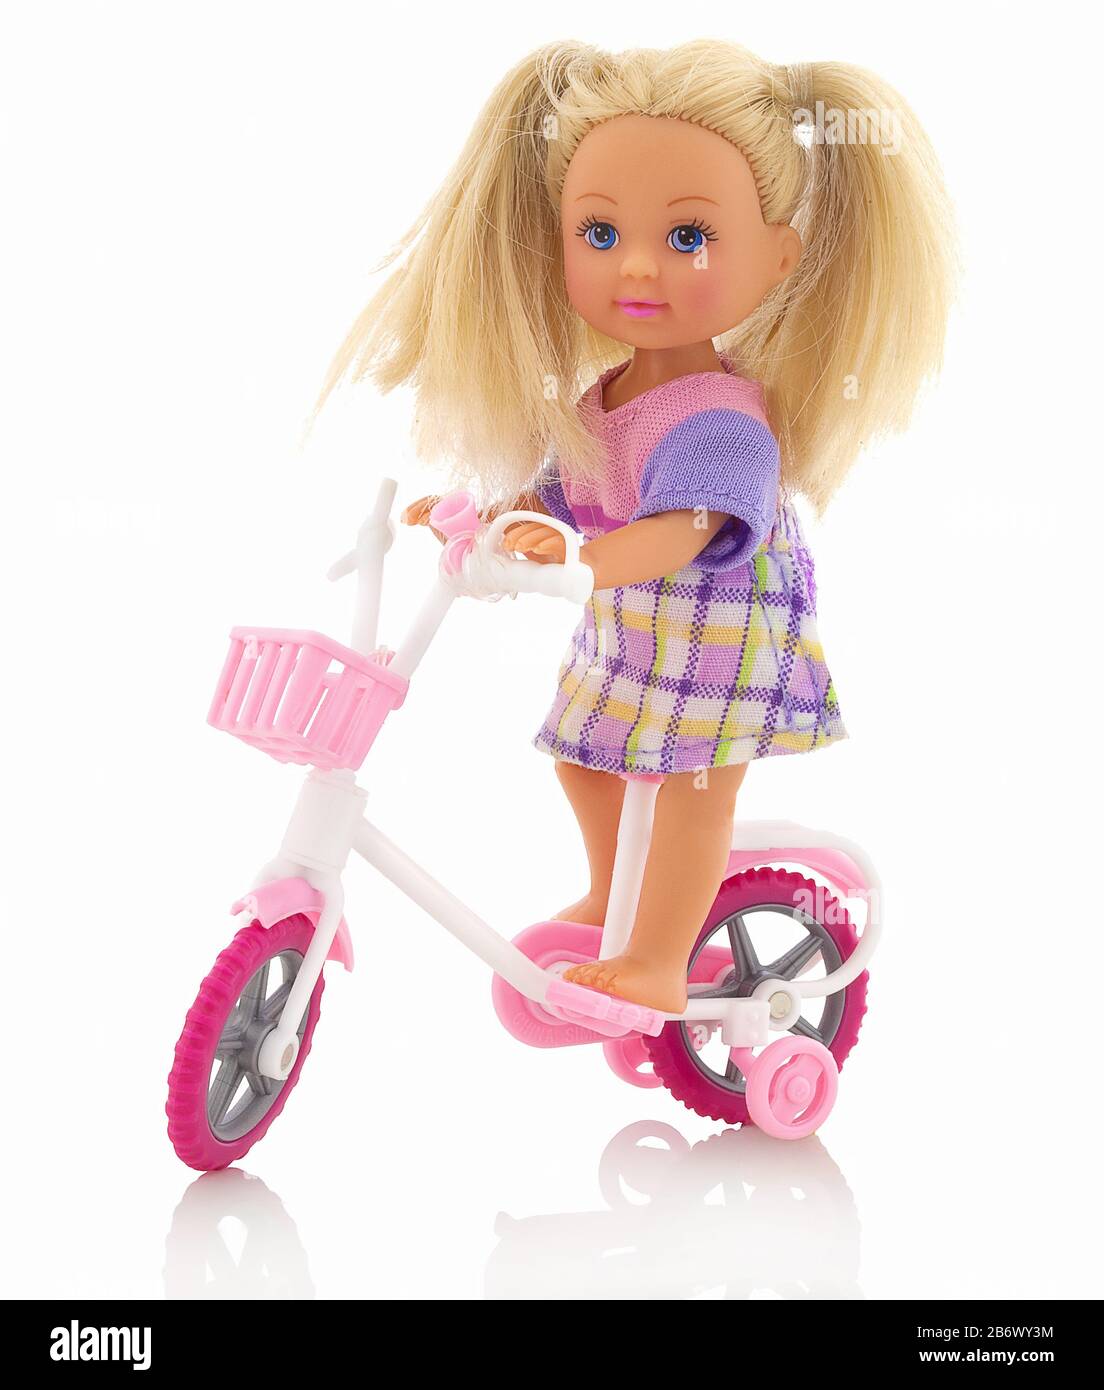 Small plastic baby girl toy on bicycle. Isolated on white background with shadow reflection. Girl toy on bike with auxiliary wheels and wire basket. C Stock Photo